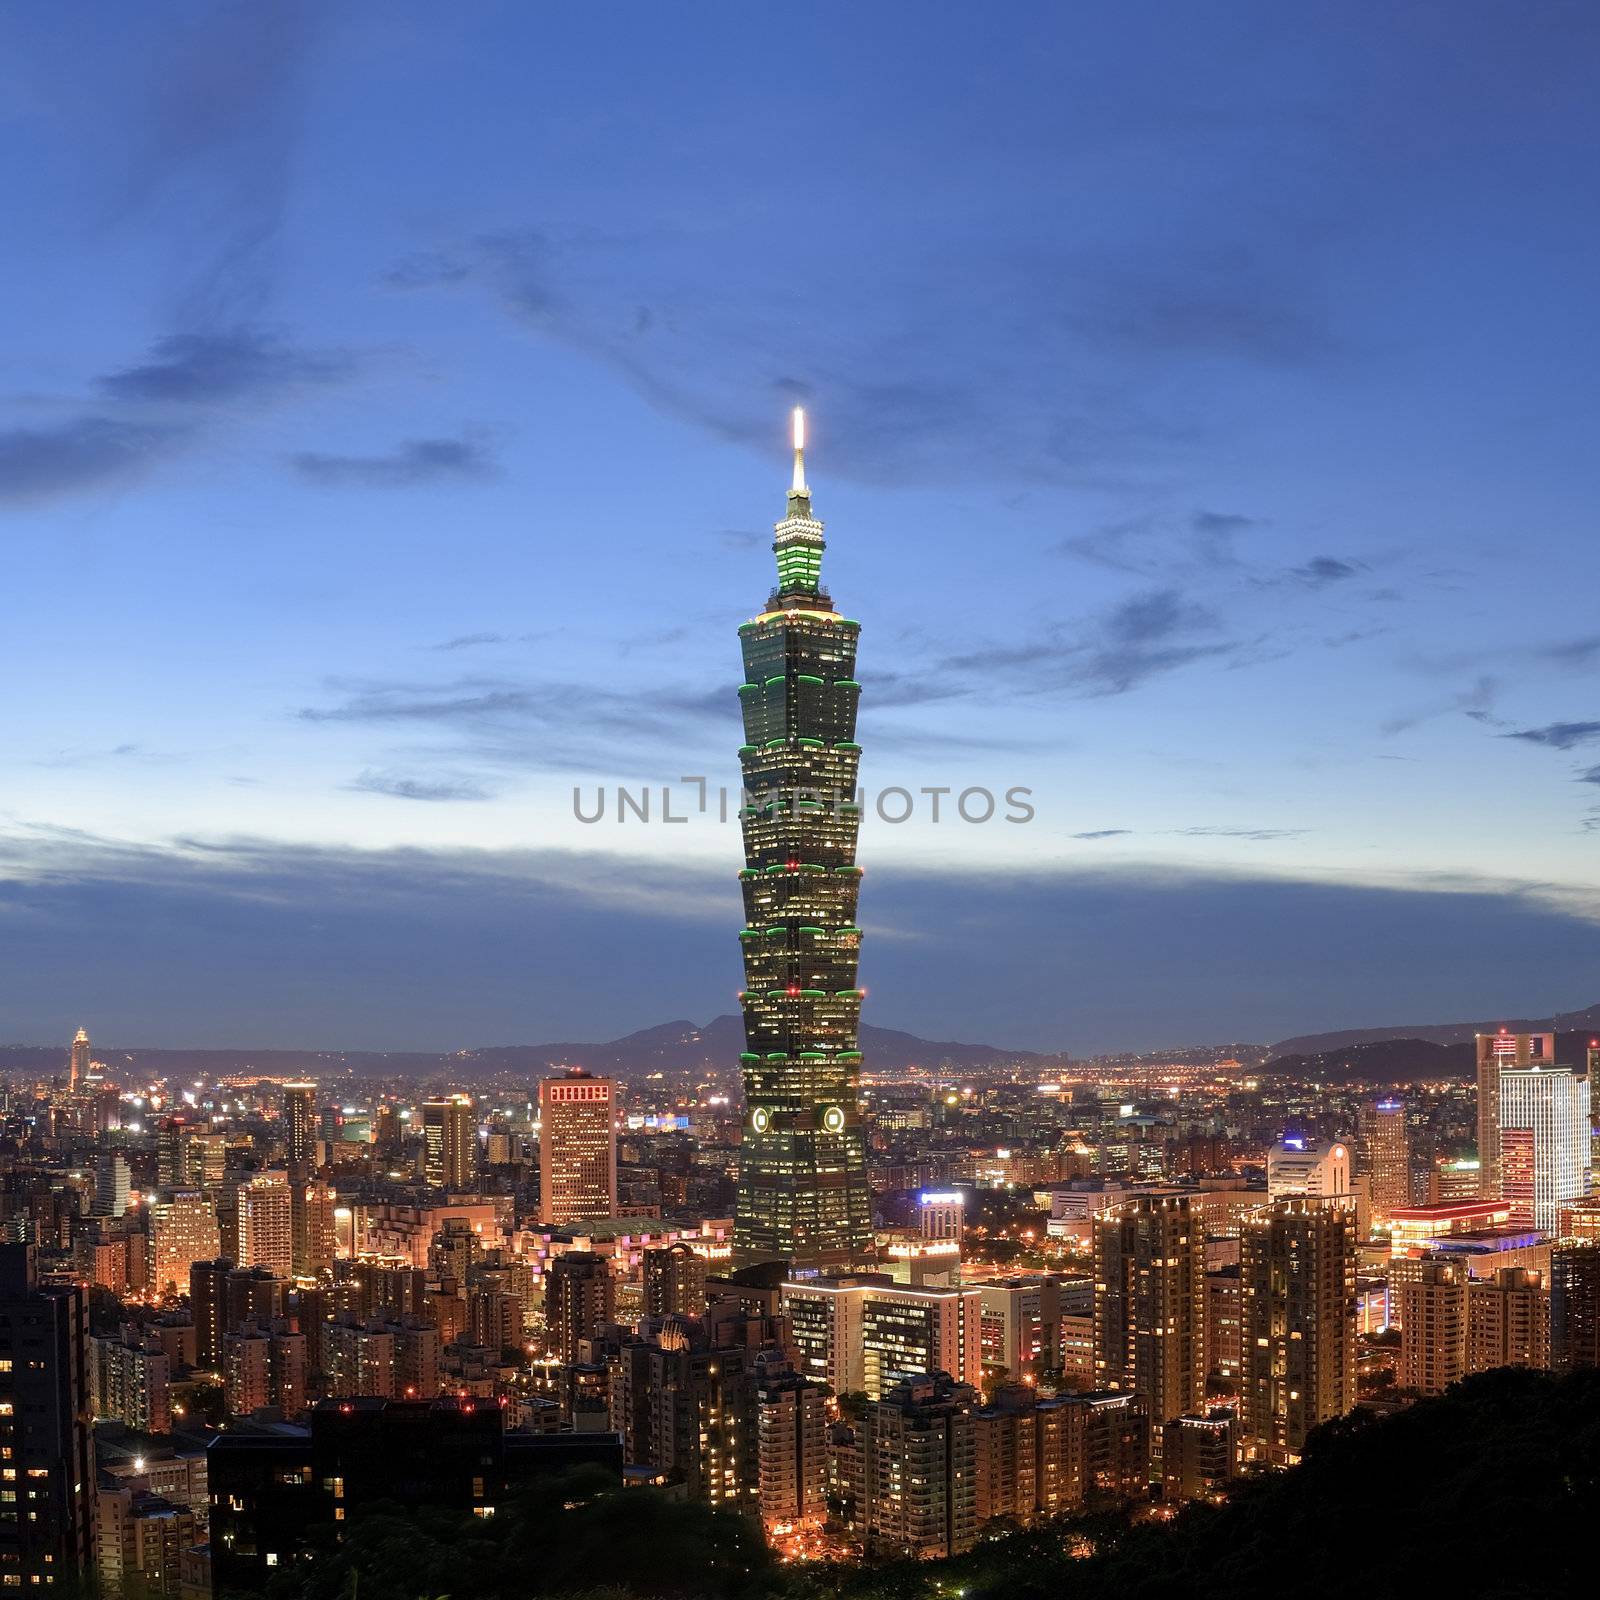 City skyline in night with famous 101 skyscraper and buildings in Taipei, Taiwan.